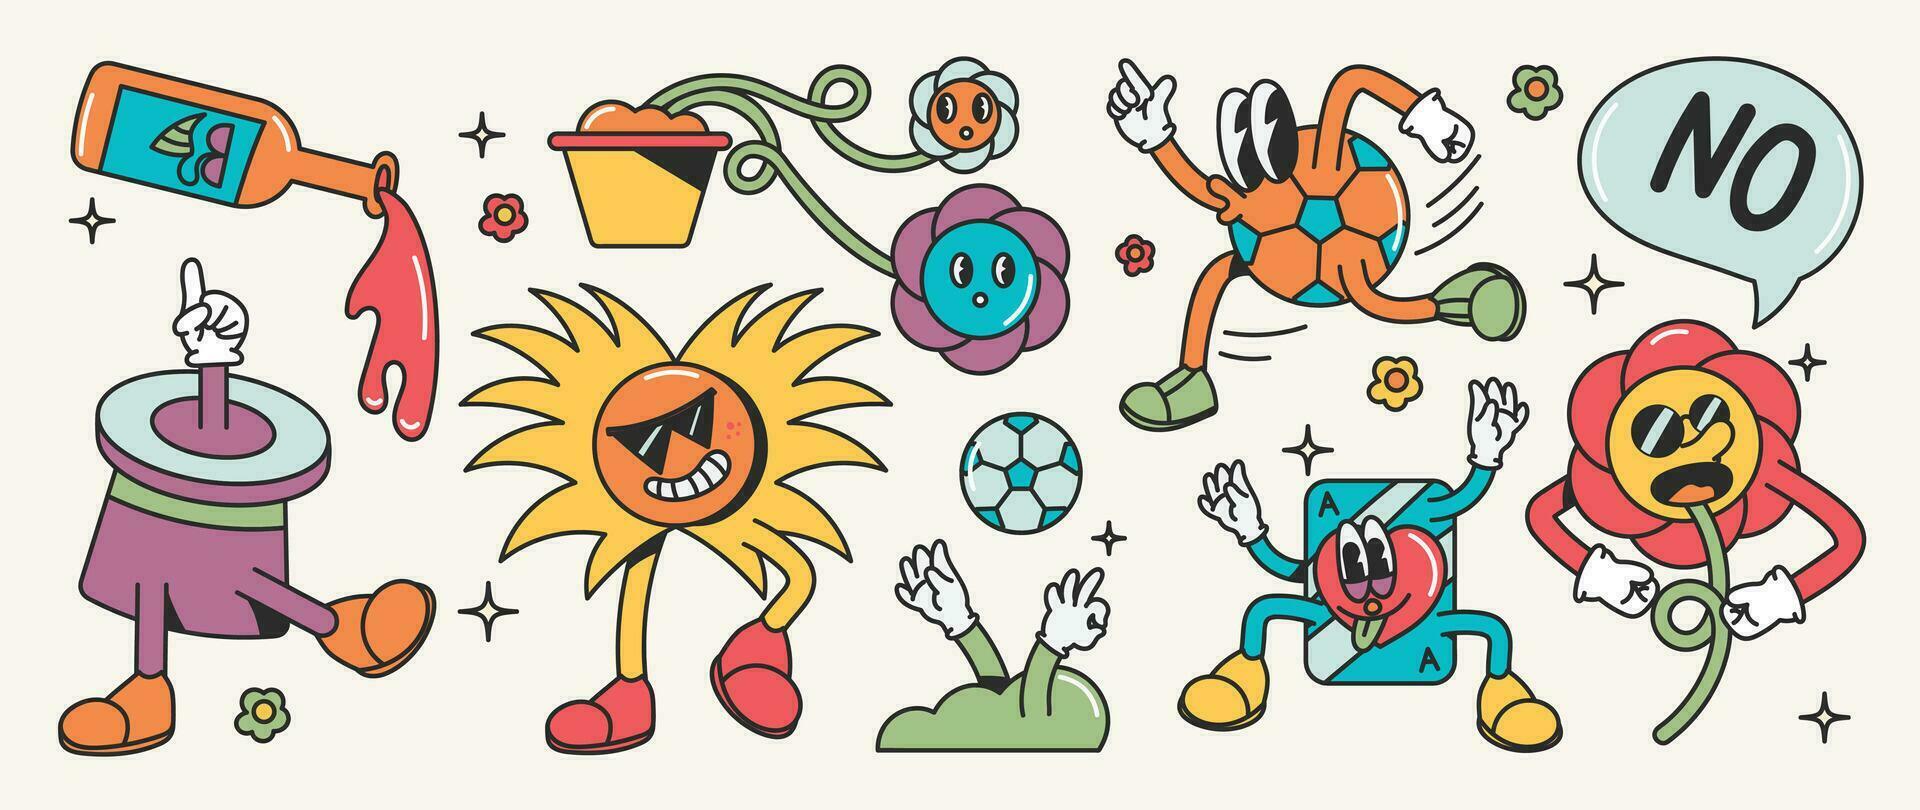 Set of 70s groovy element vector. Collection of cartoon characters, doodle smile face, bottle, vase, flower, ball, sun, cloud, speech bubble. Cute retro groovy hippie design for decorative, sticker. vector